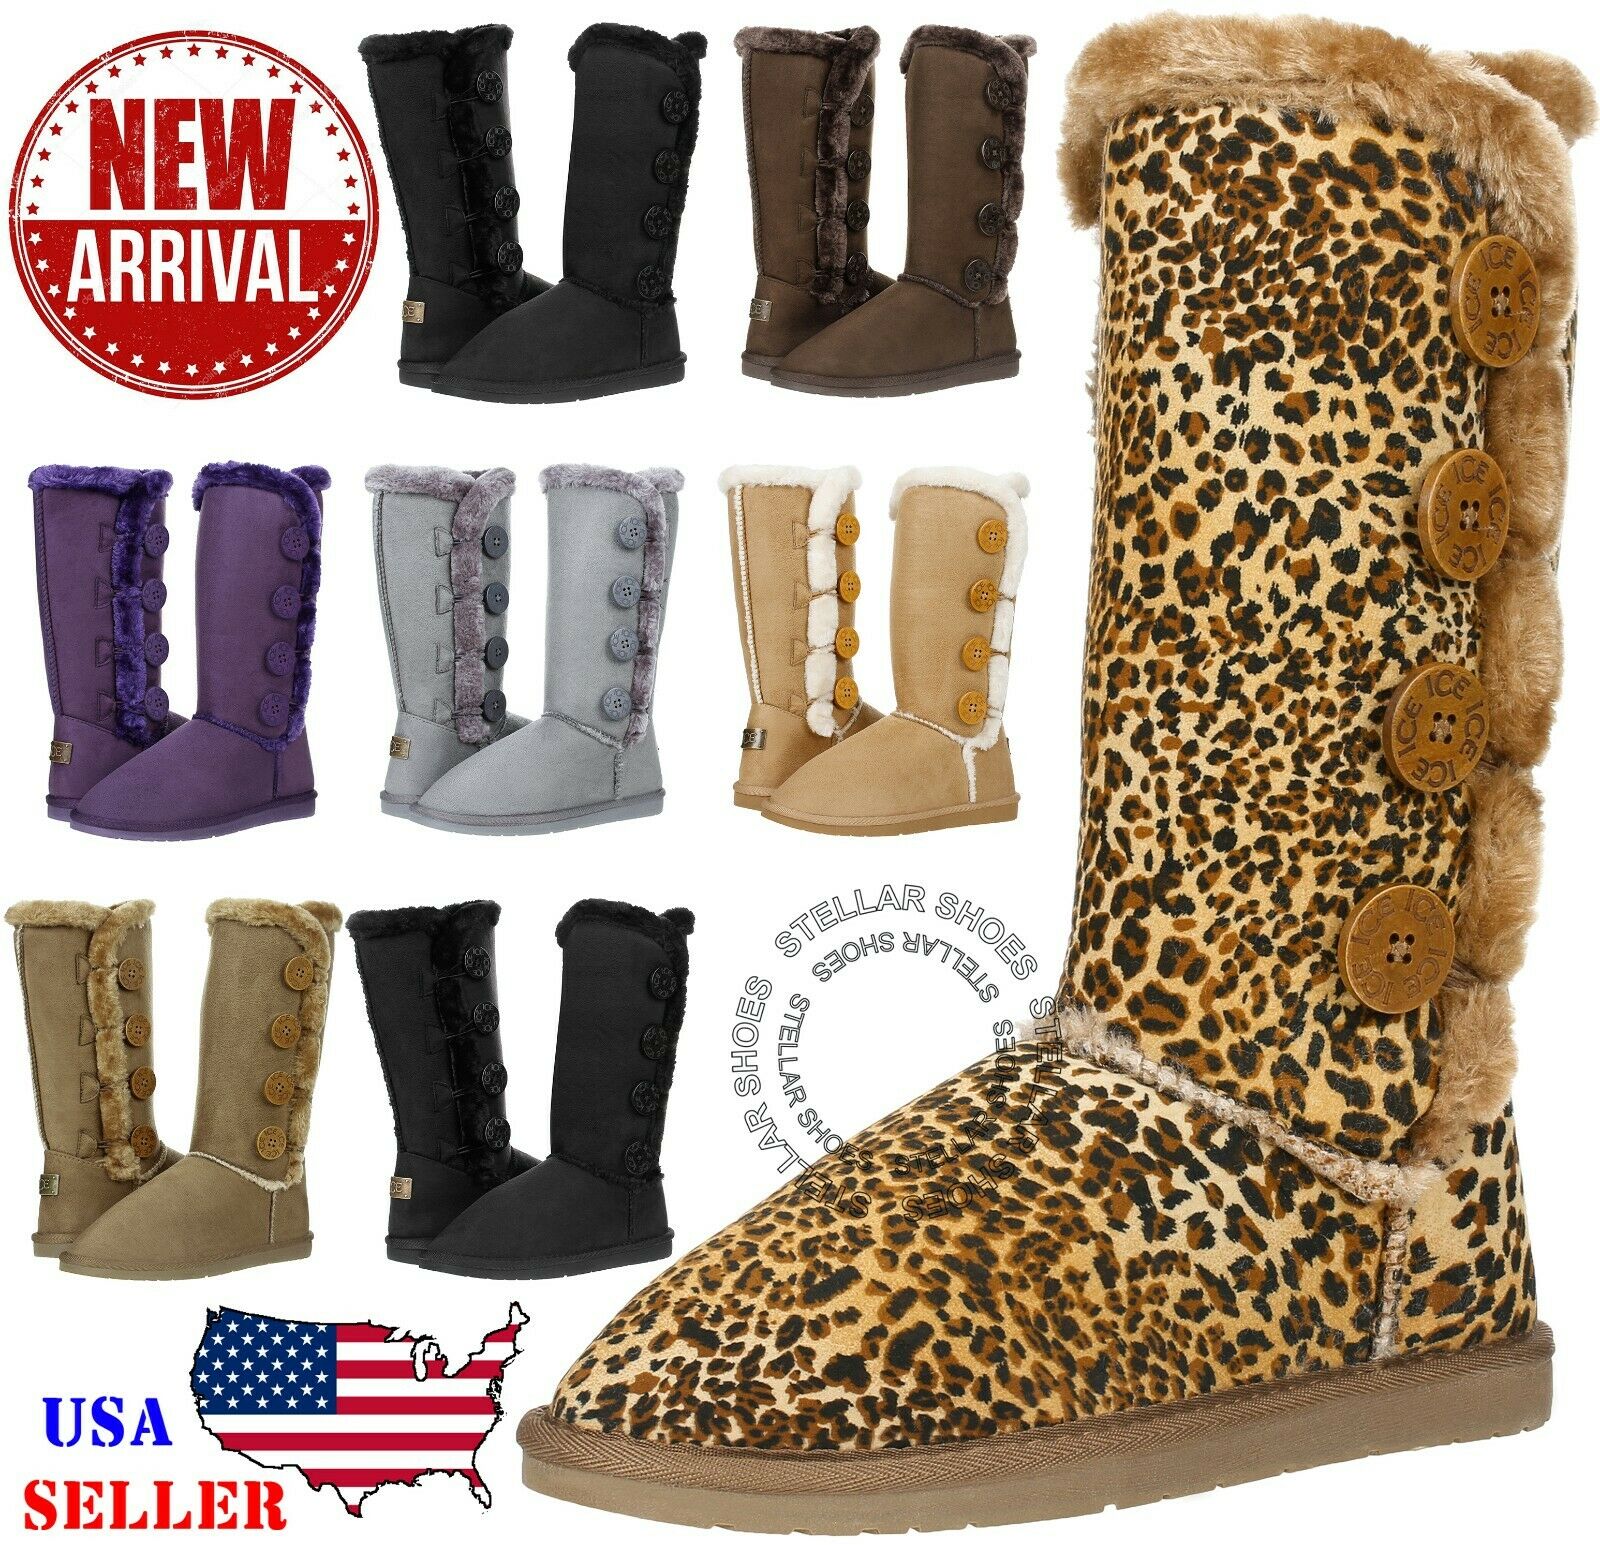 Women’s faux fur-lined shearling boots for $30, free shipping